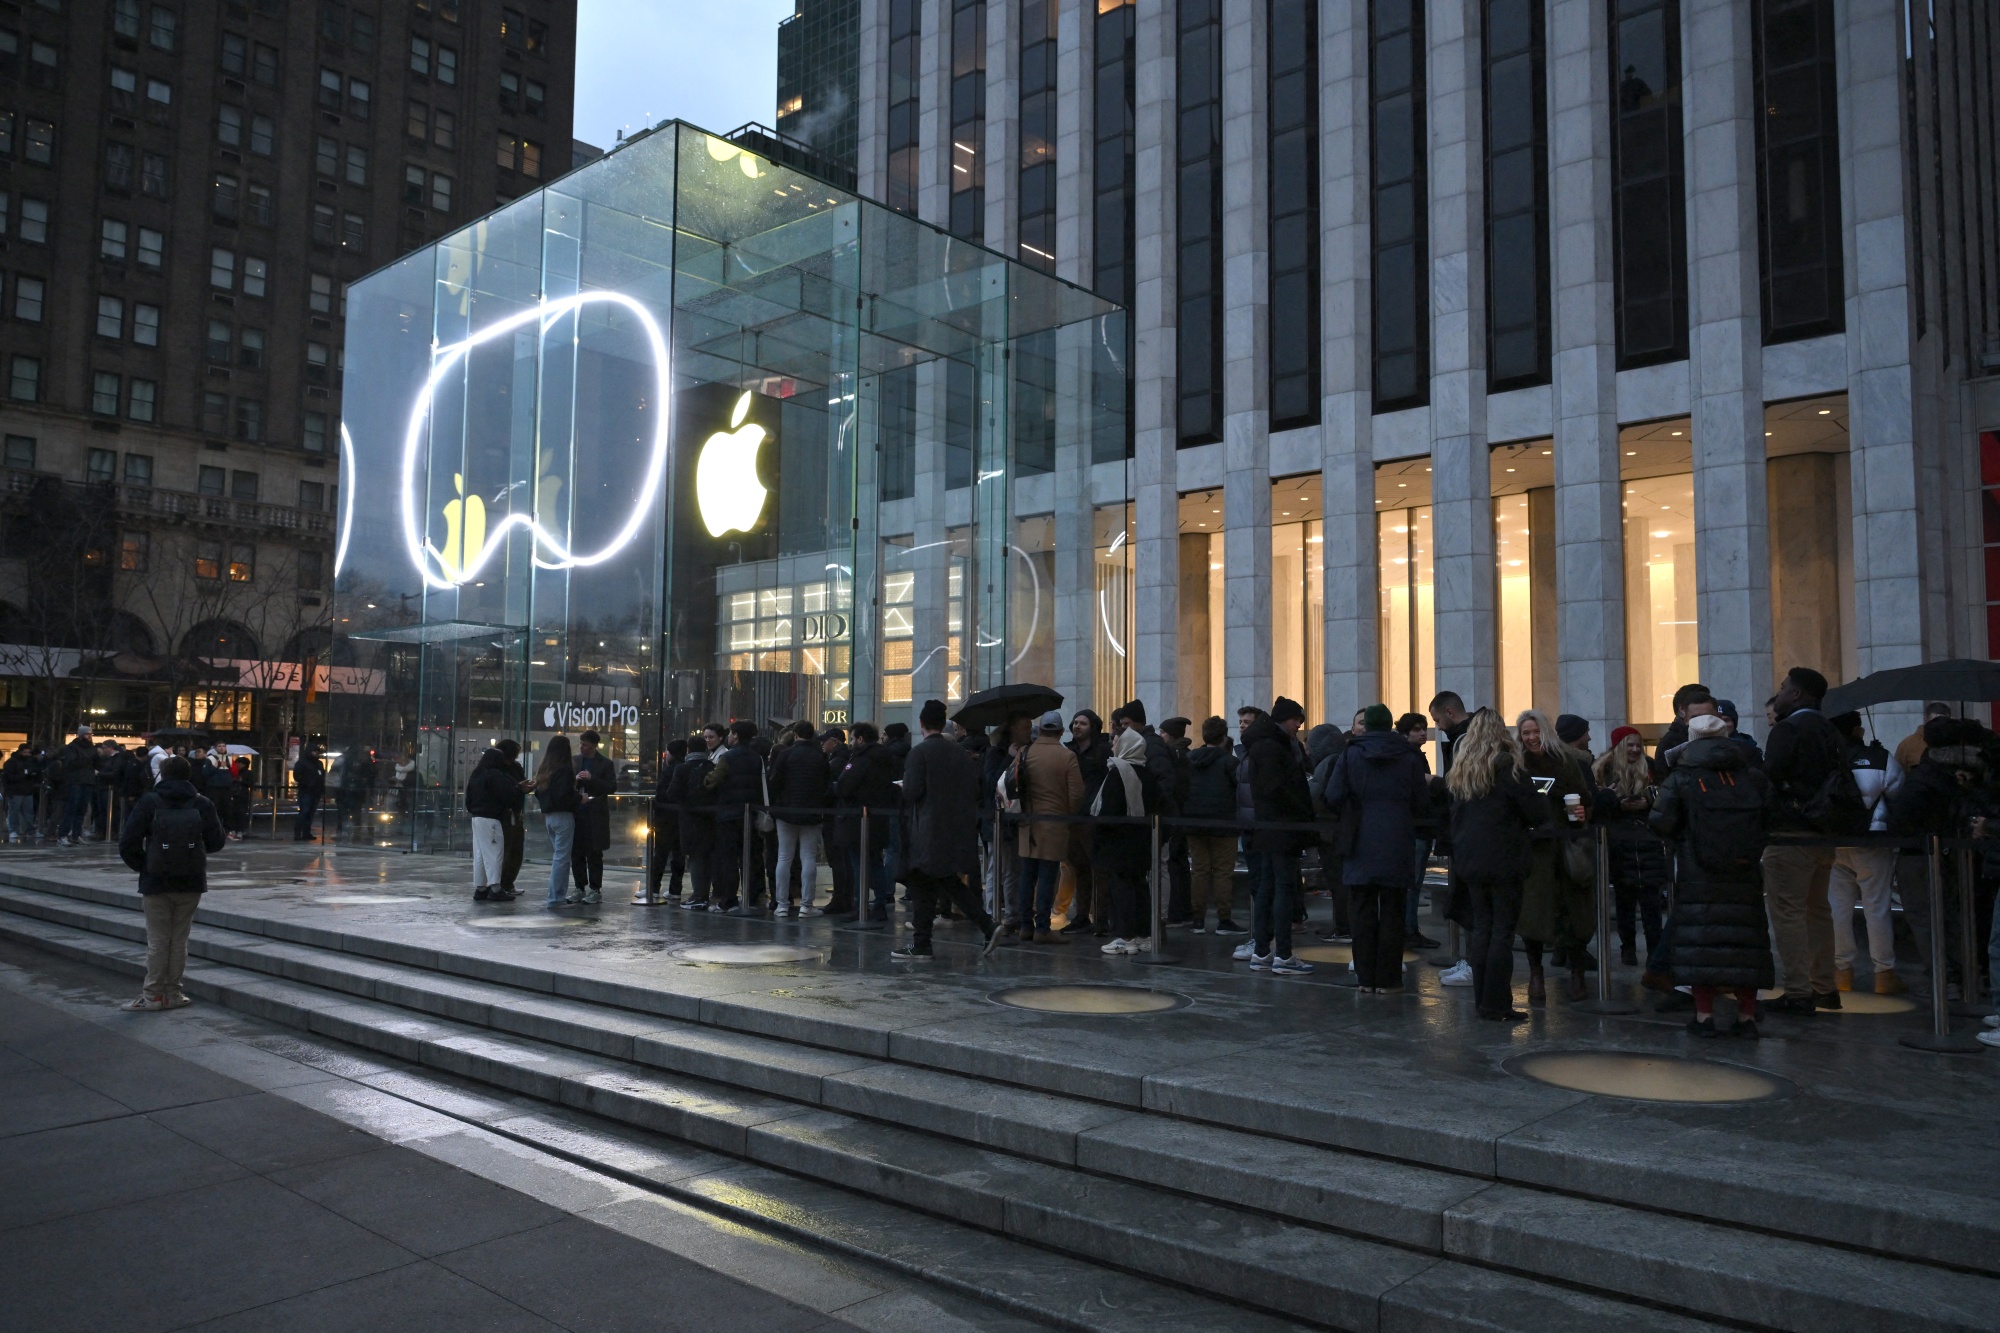 People line up outside the New York Apple Store as the Vision Pro headset is released on Feb. 2.